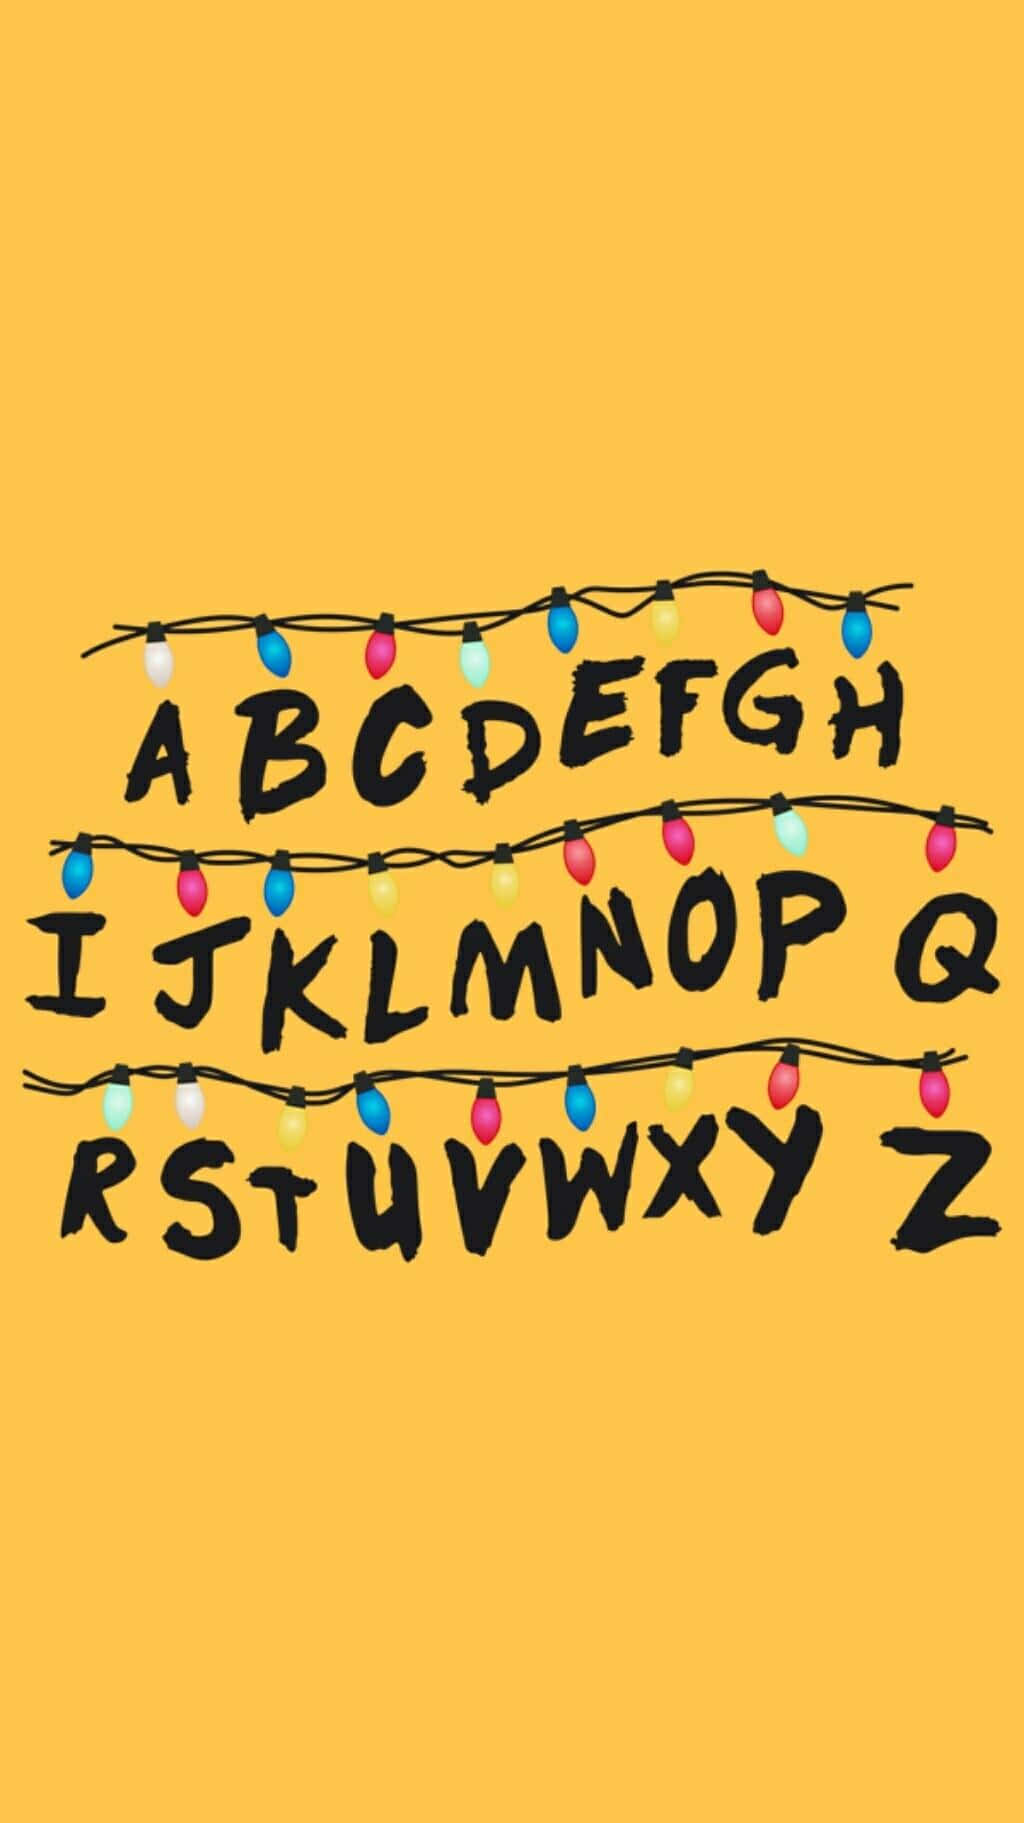 A Christmas Alphabet With Lights On It